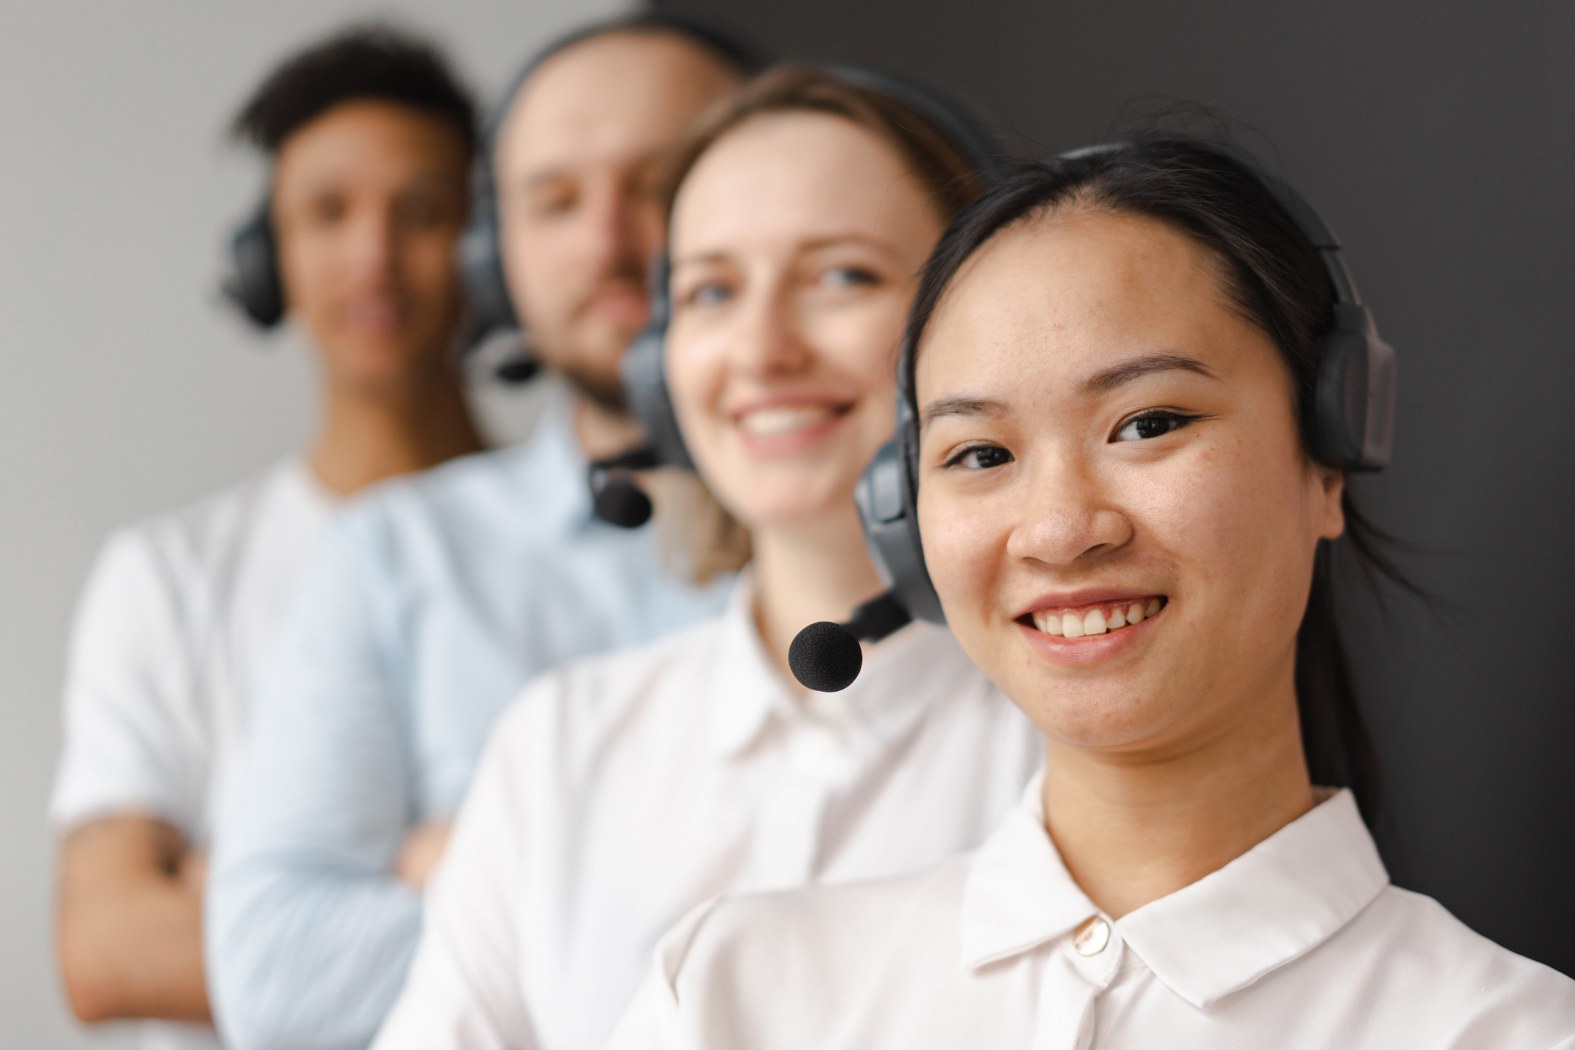 images of 4 people representing Call receptionist excellence with virtual receptionists